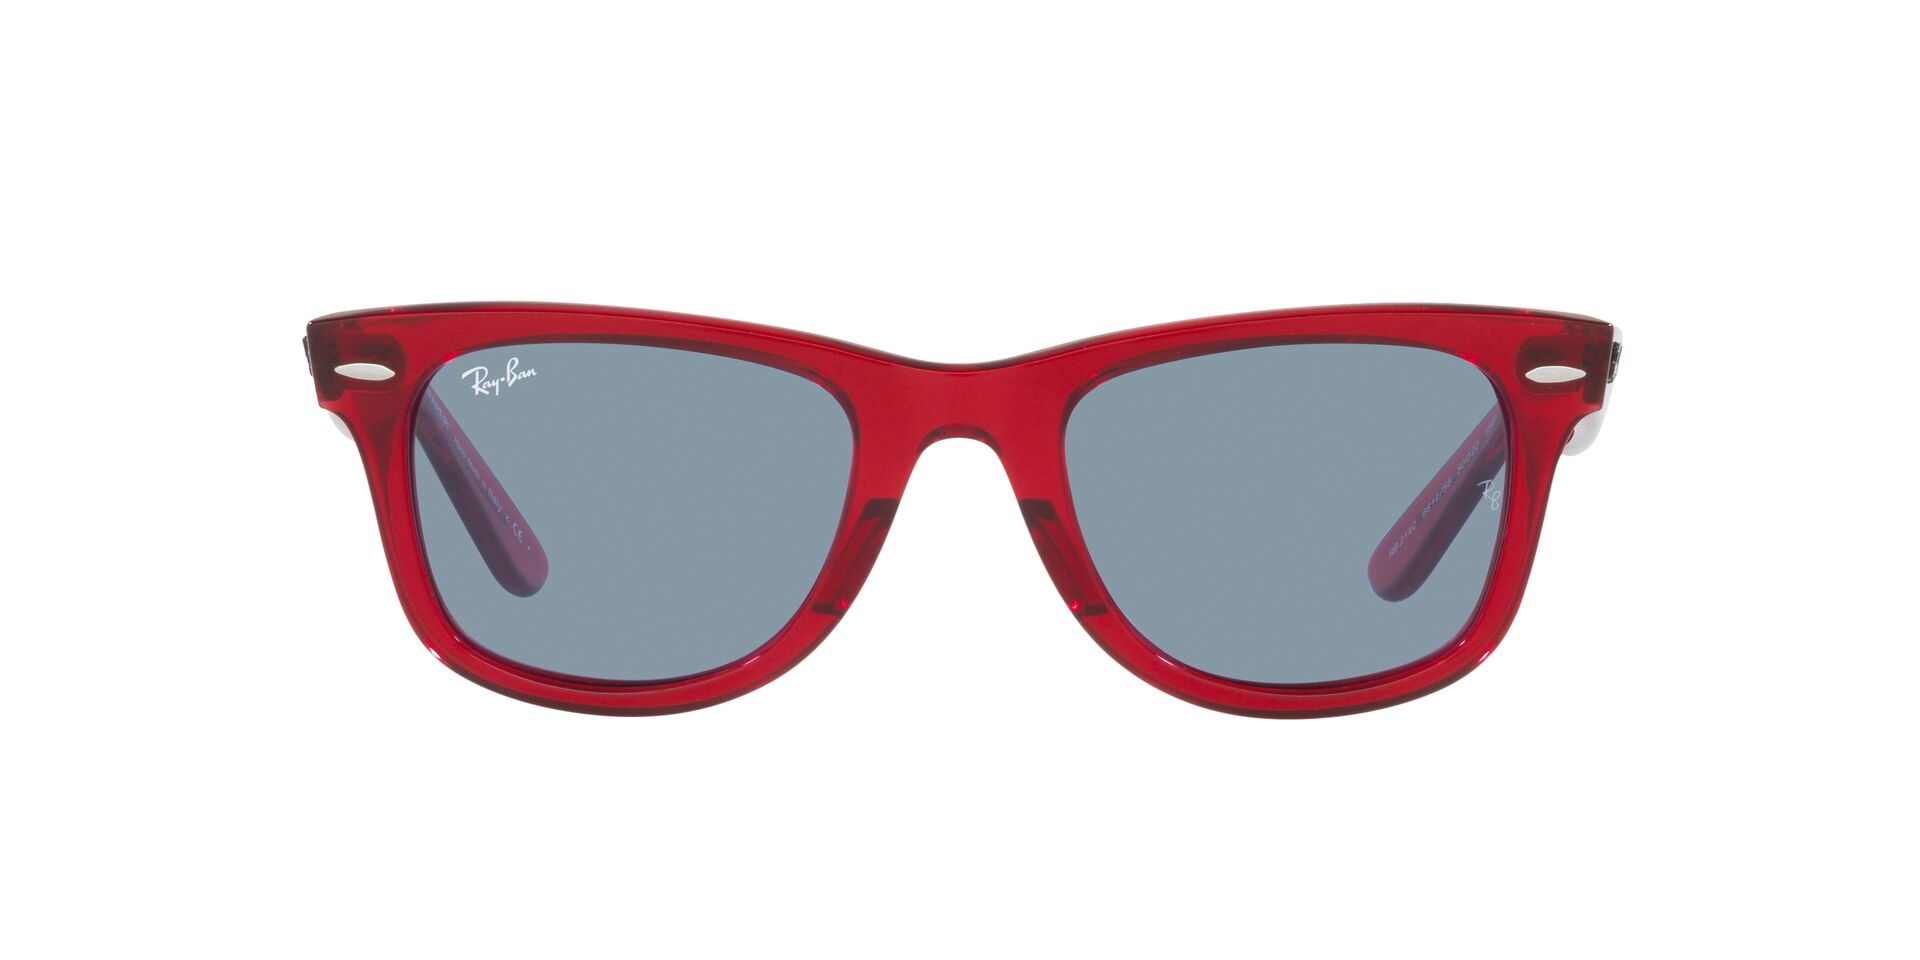 Ray-Ban Stories | Meteor Square Smart Glasses with India | Ubuy